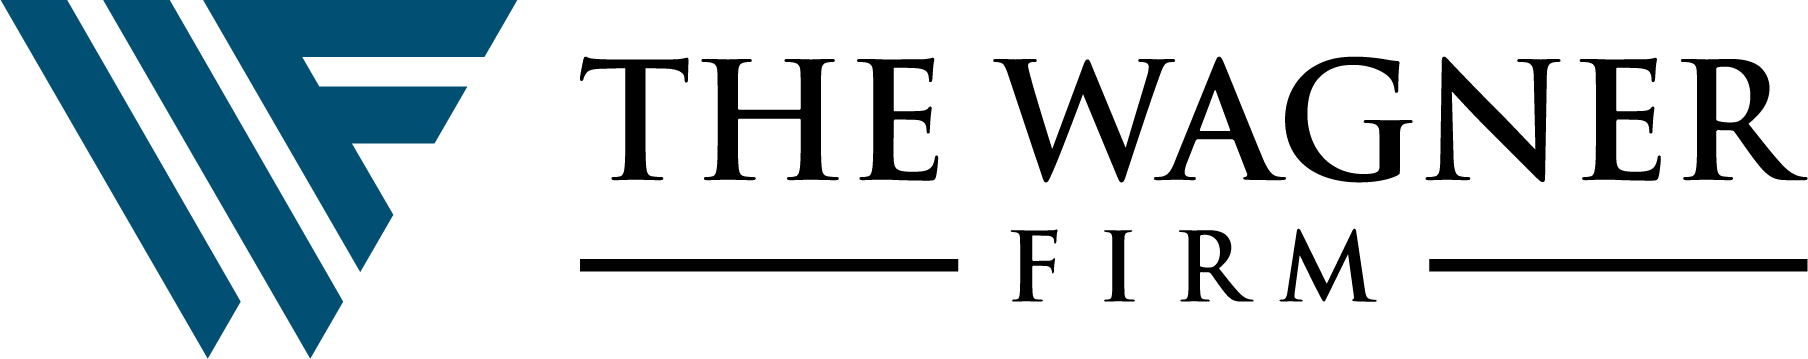 the-wagner-firm-logo-inverse-horizontal